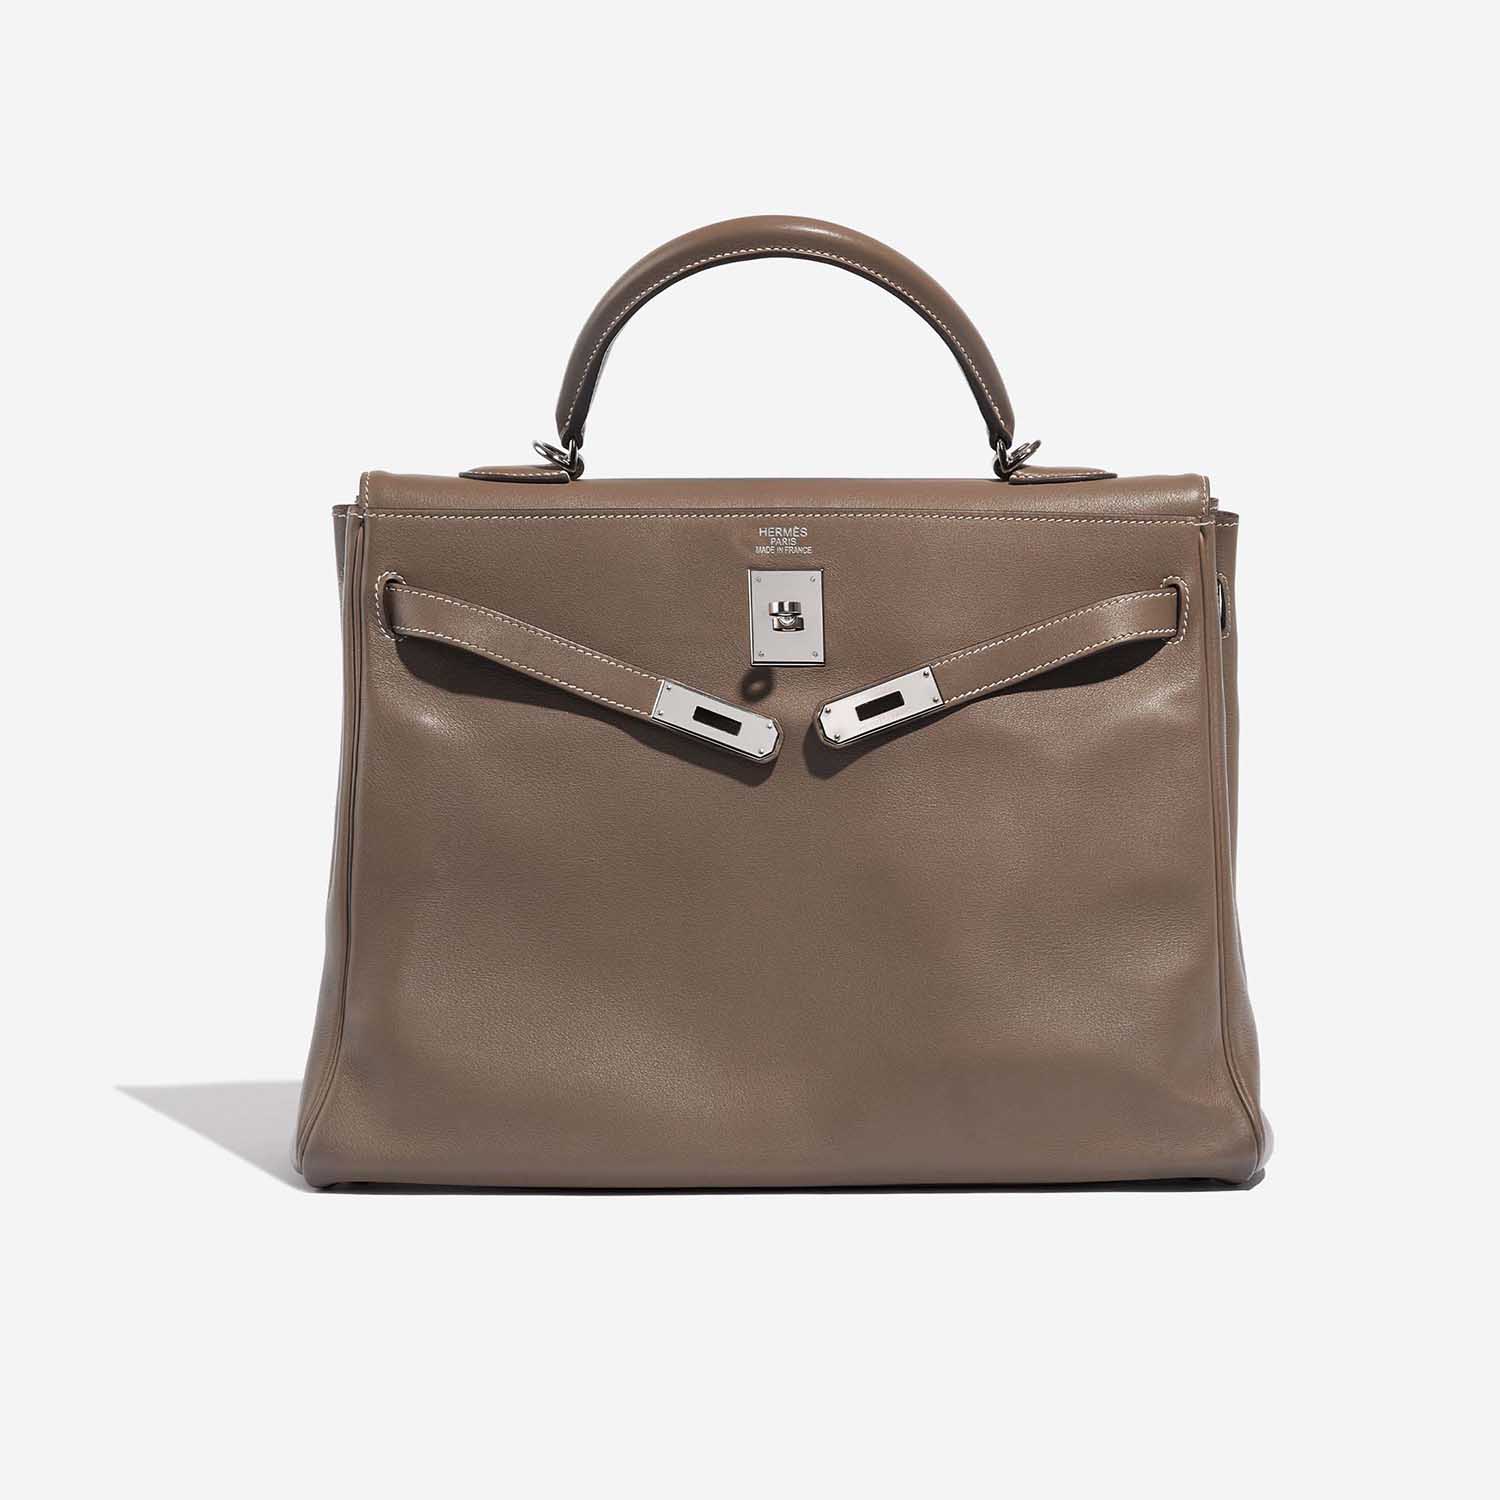 Pre-owned Hermès bag Kelly 35 Swift Etoupe Brown, Grey Front Open | Sell your designer bag on Saclab.com